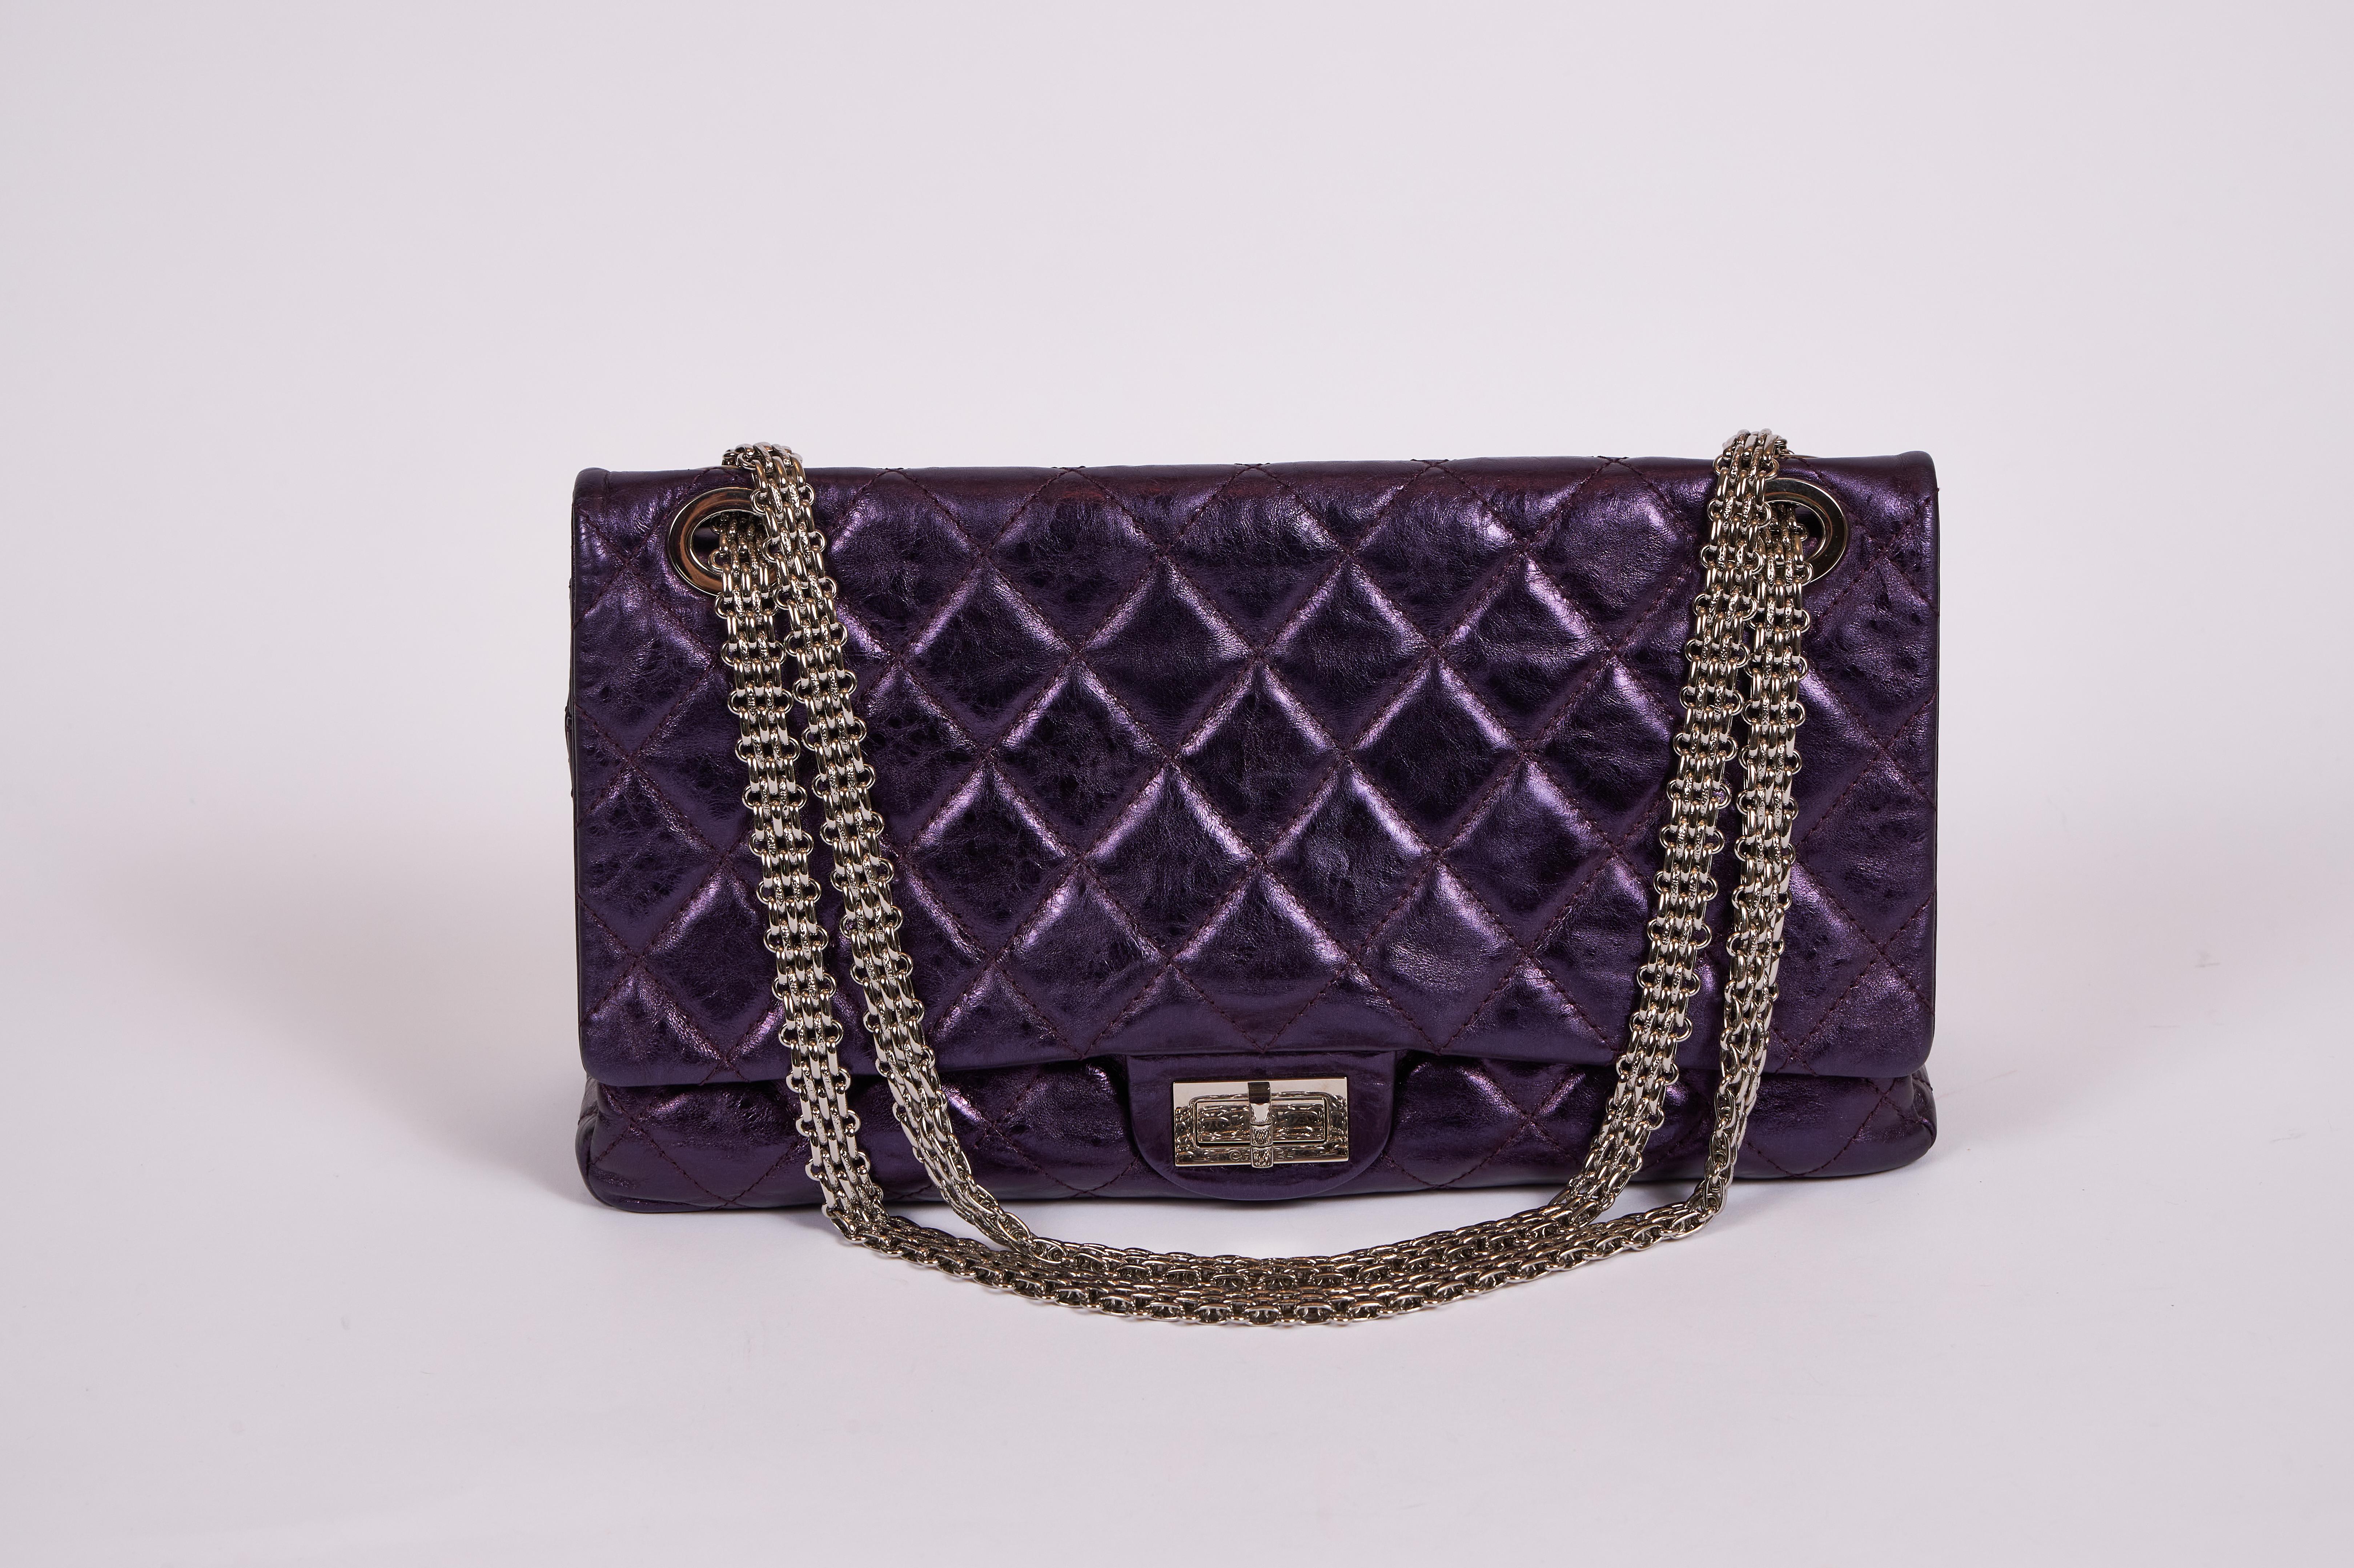 Chanel limited edition maxi reissue double flap with extra thick silver chain. Purple metallic distressed leather. Shoulder drop 10